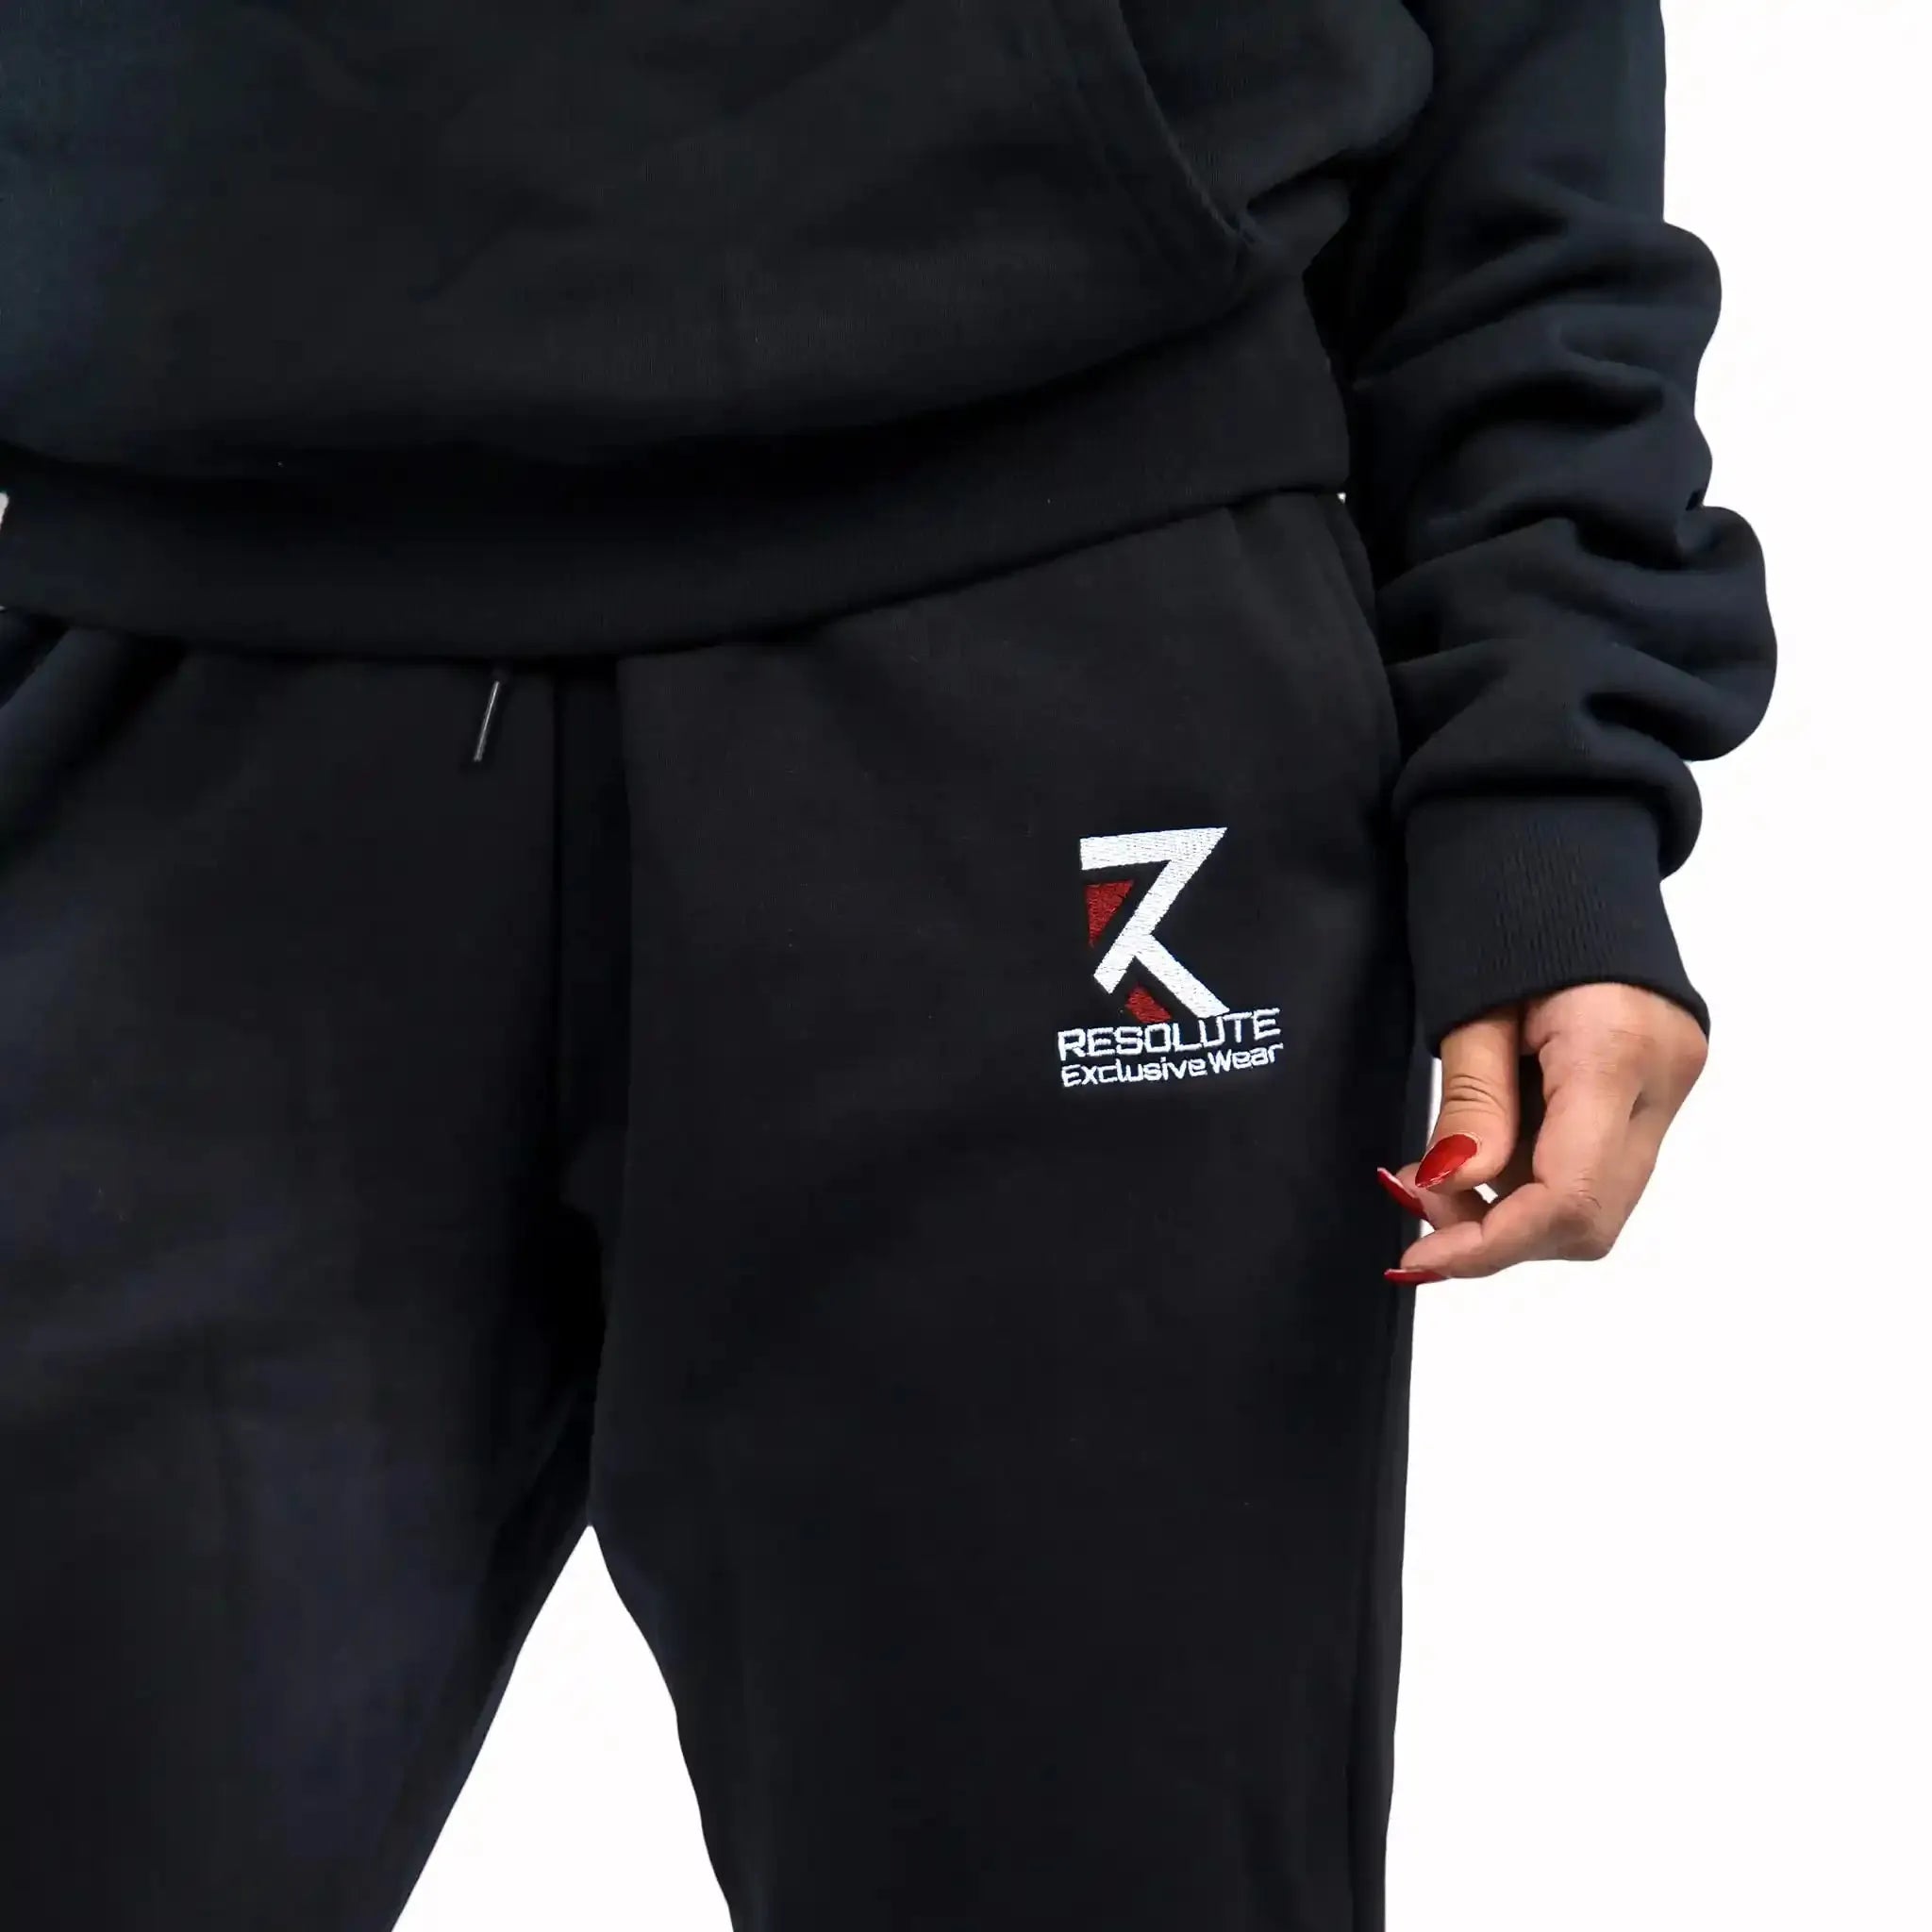 Super Heavy Sweatpants, Hose, Clothing, Resolute Exclusive Wear